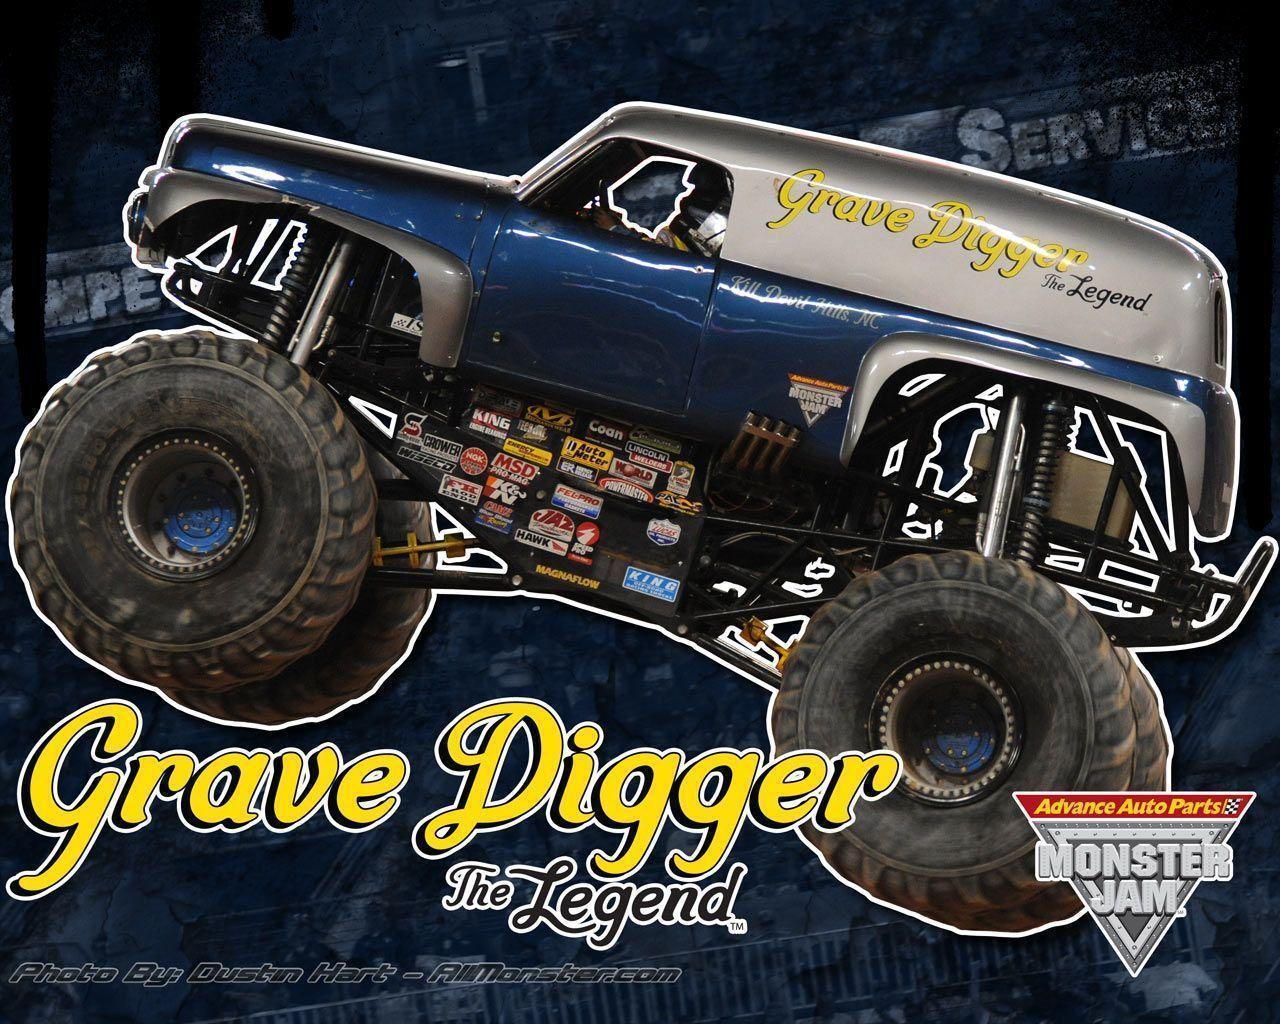 Grave Digger The Legend.com Monsters Are What